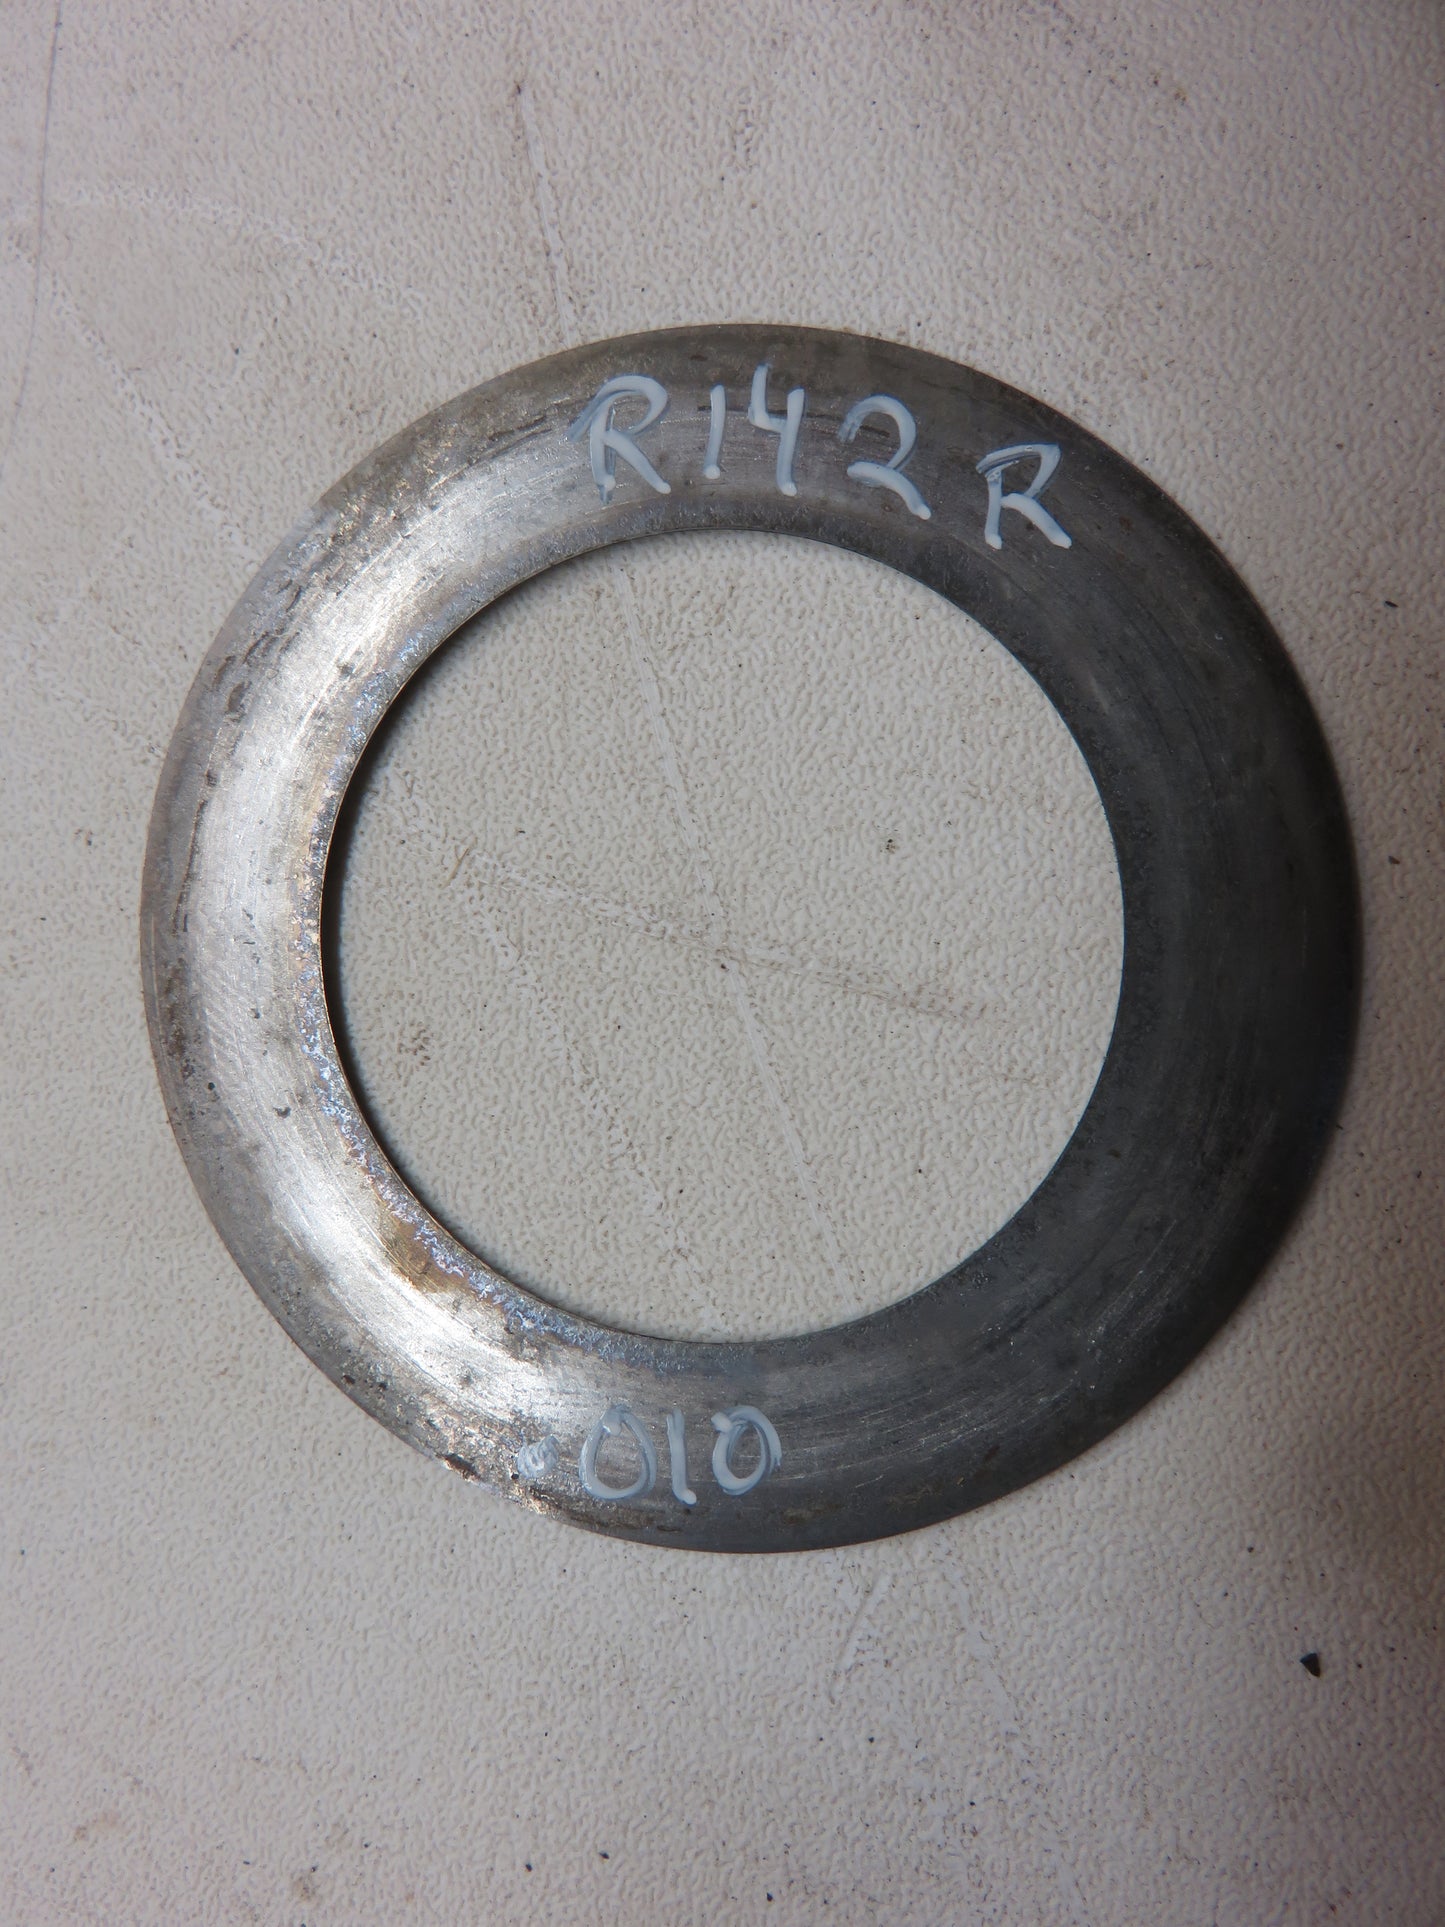 R142R John Deere Thick Camshaft Shim Washer For R, 80, 820, 830